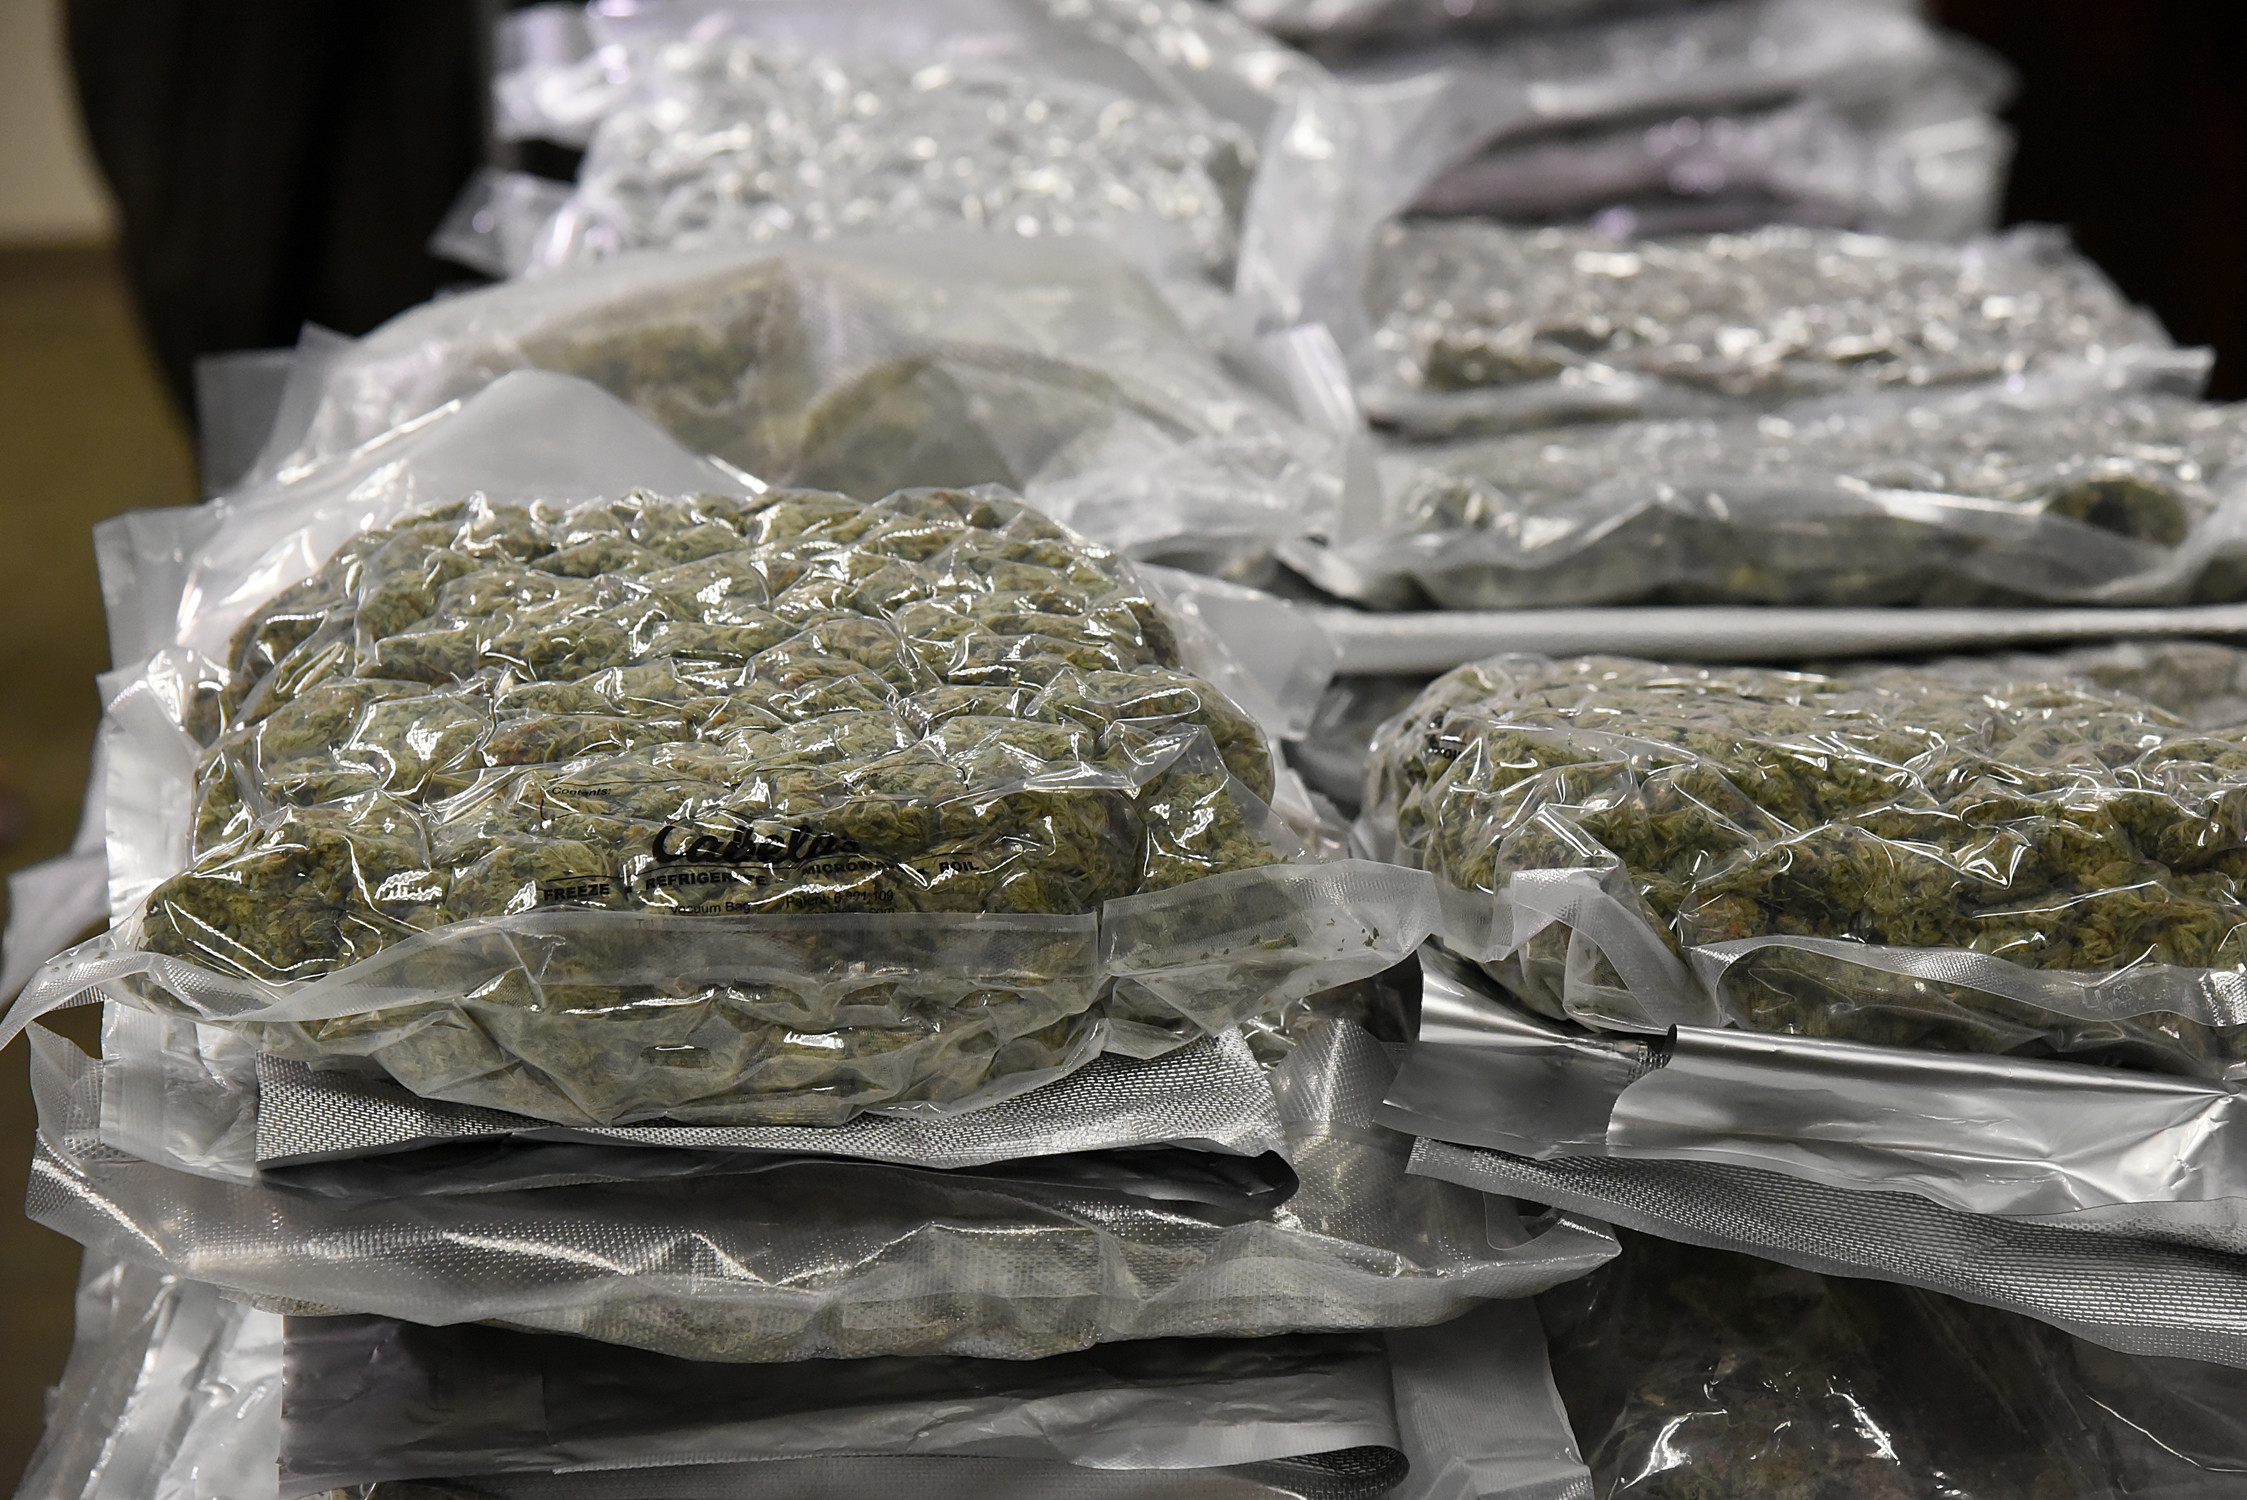 Arizona Man Arrested After Trying To Smuggle 24 Pounds Of Marijuana To St. Croix